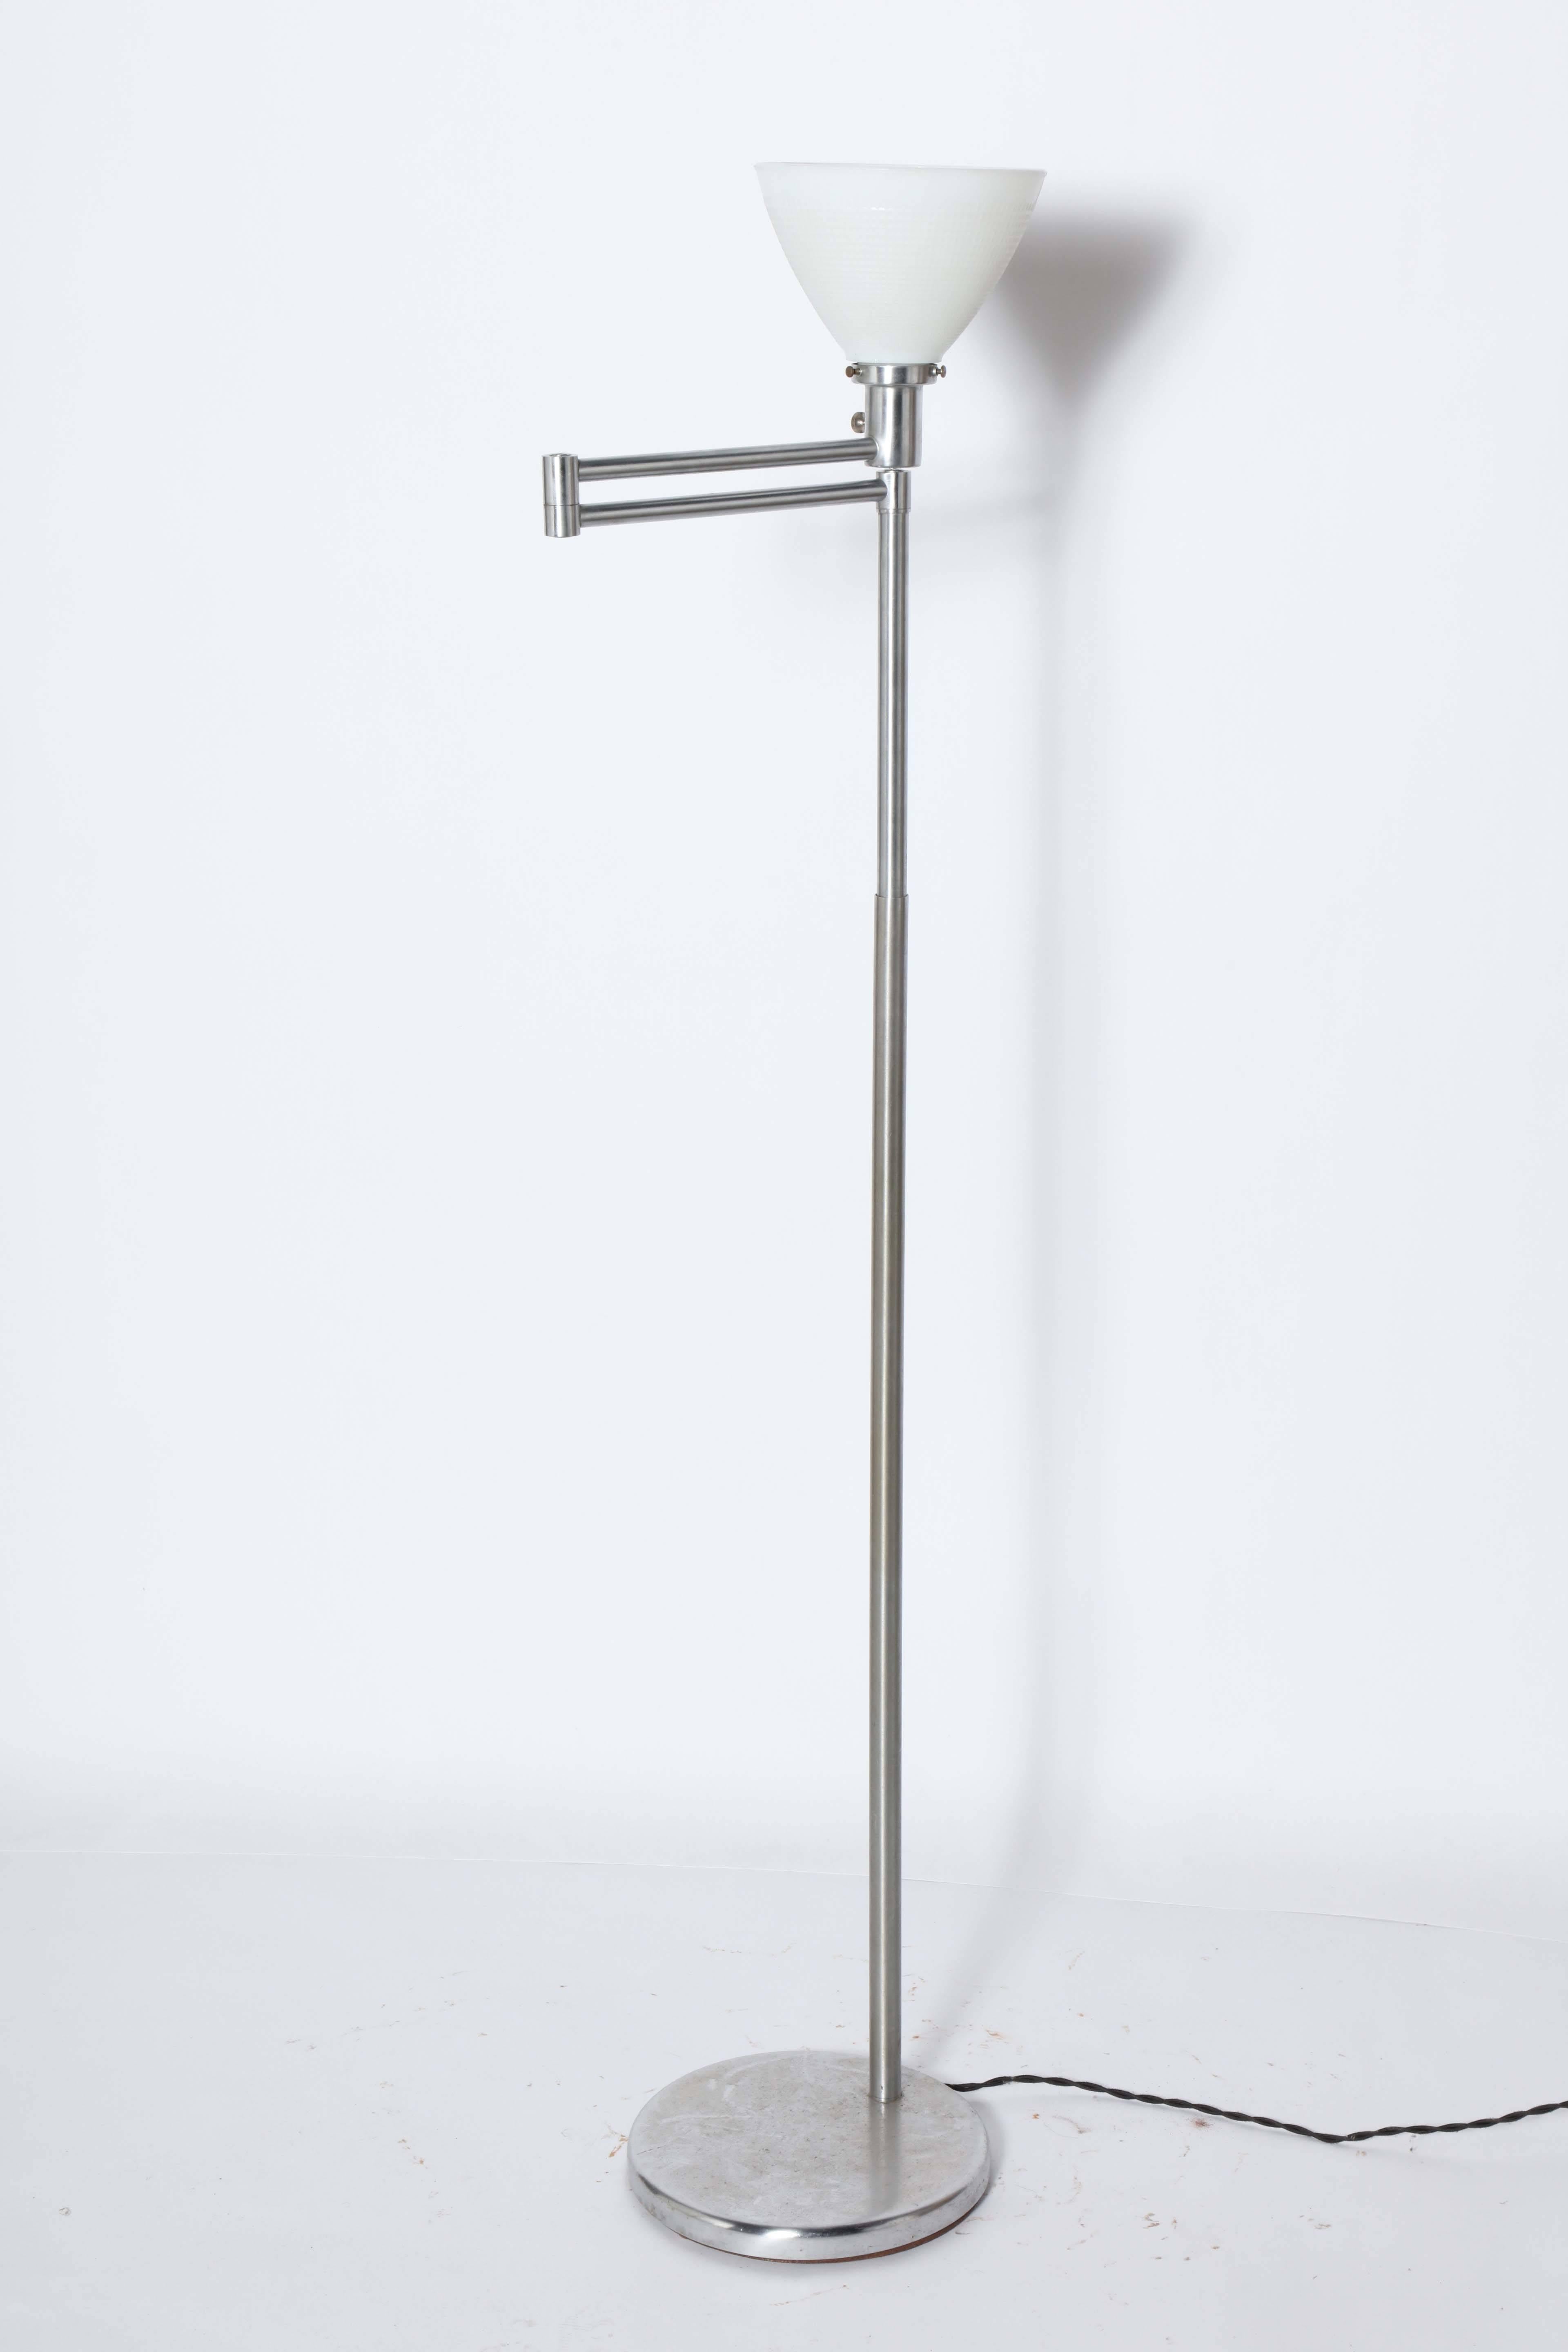 Walter Von Nessen designed Brushed Steel Swing Arm Reading Floor Lamp with White Glass Shade, 1950's. Small footprint. Featuring an adjustable Brushed Steel swing arm with White Milk glass liner shade Arm extends to 17D. Timeless. Classic. Fine